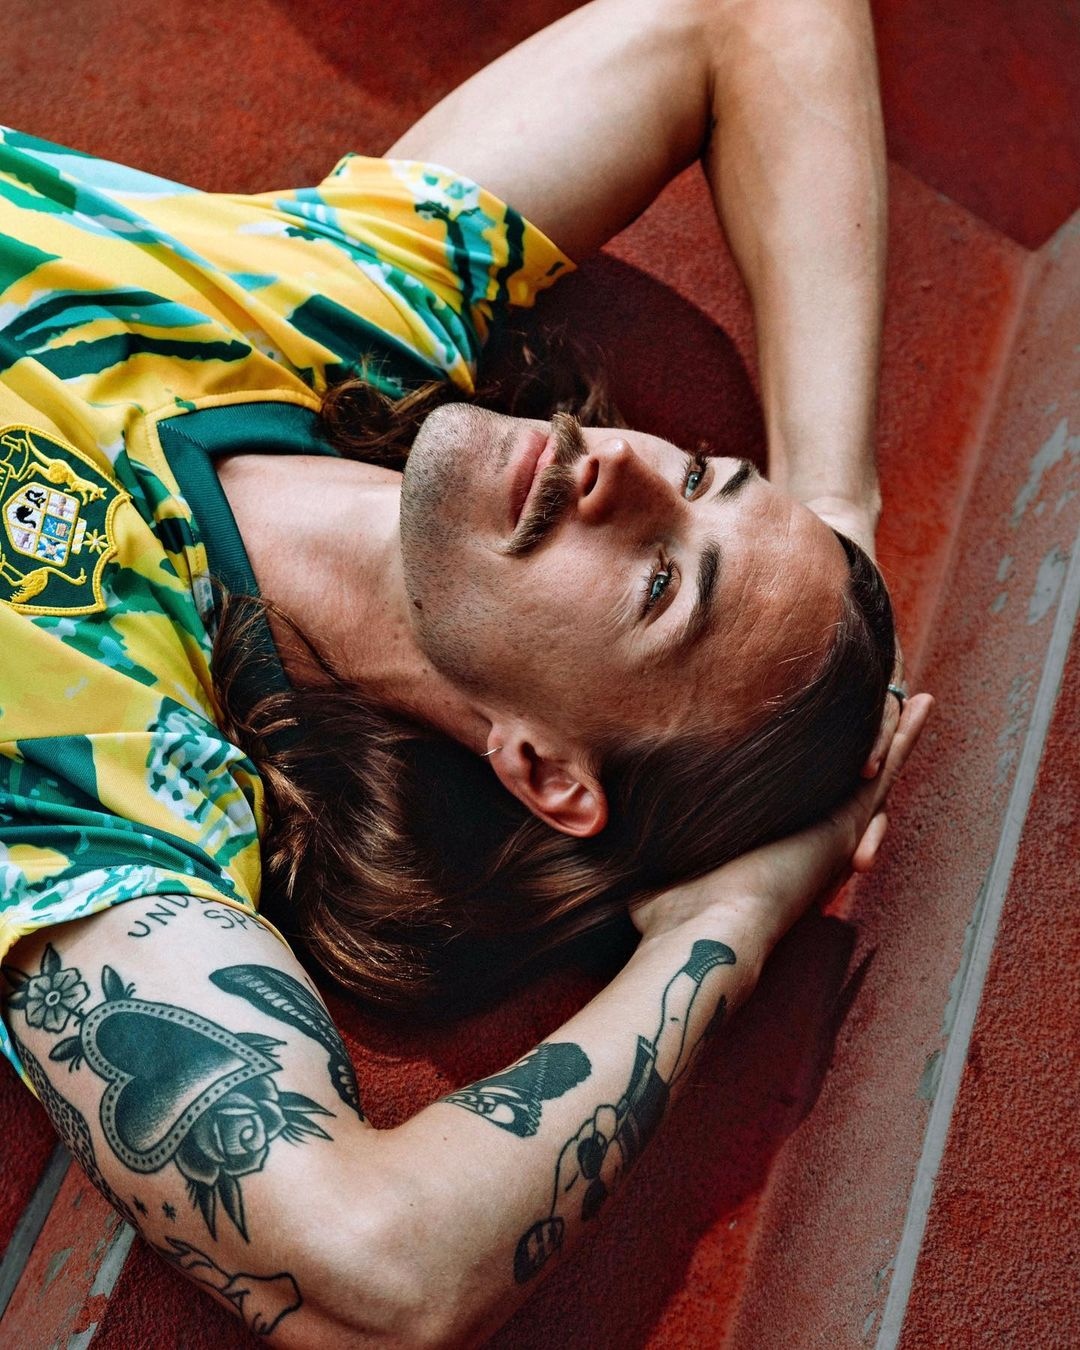 Jackson Irvine, Jackson Irvine fashion, Jackson Irvine ig, Jackson Irvine outfits, Jackson Irvine world cup, fifa world cup, world cup 2022, ฟุตบอลโลก, ฟุตบอลโลก 2022